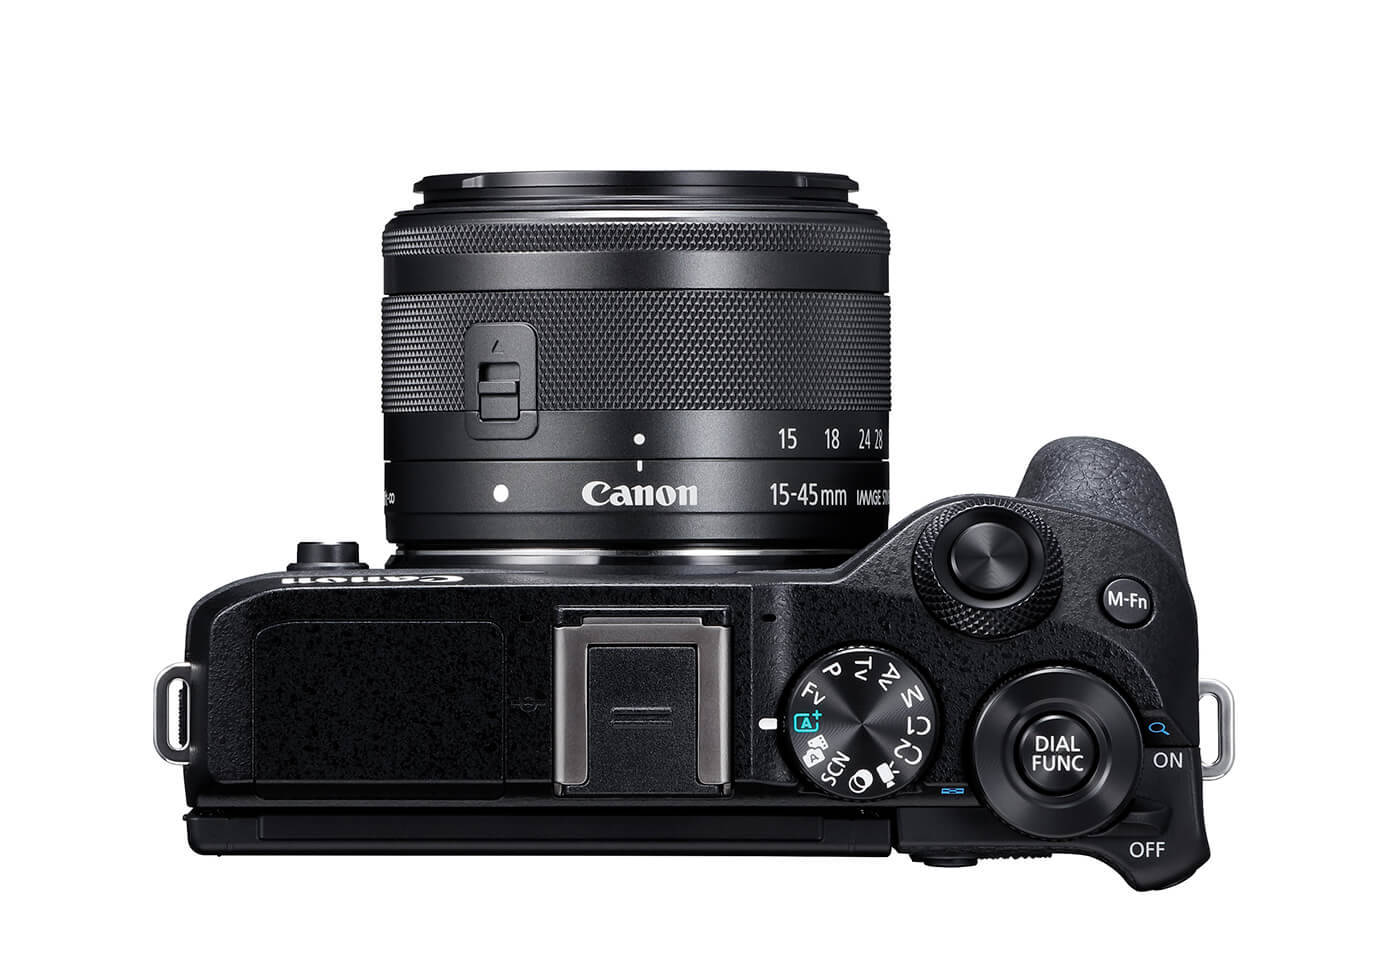 Product image for EOS M6 Mark II